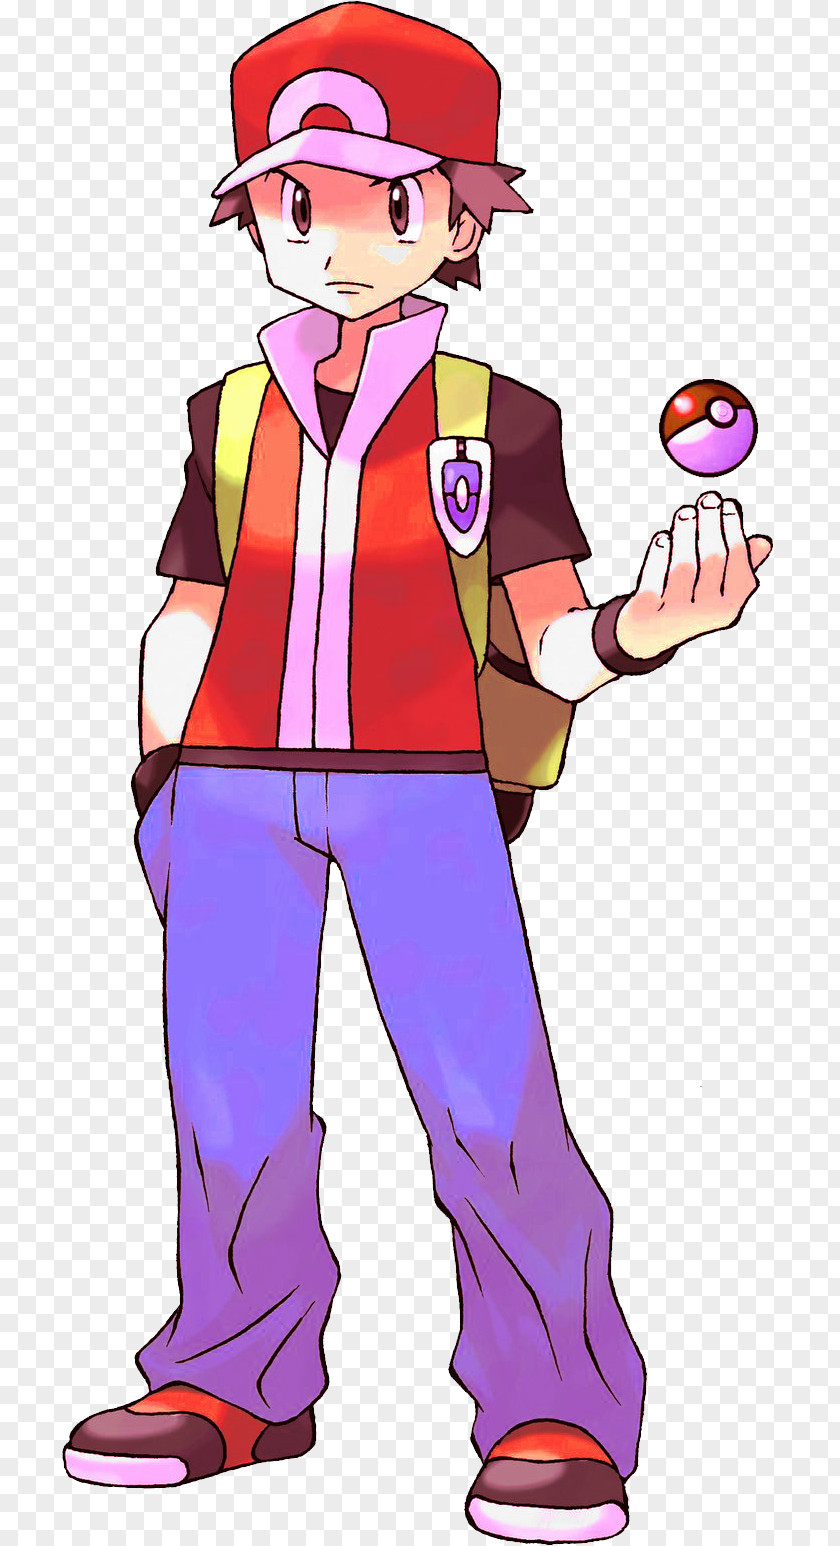 Pokemon Trainer Pokémon Red And Blue HeartGold SoulSilver Gold Silver FireRed LeafGreen Black 2 White PNG